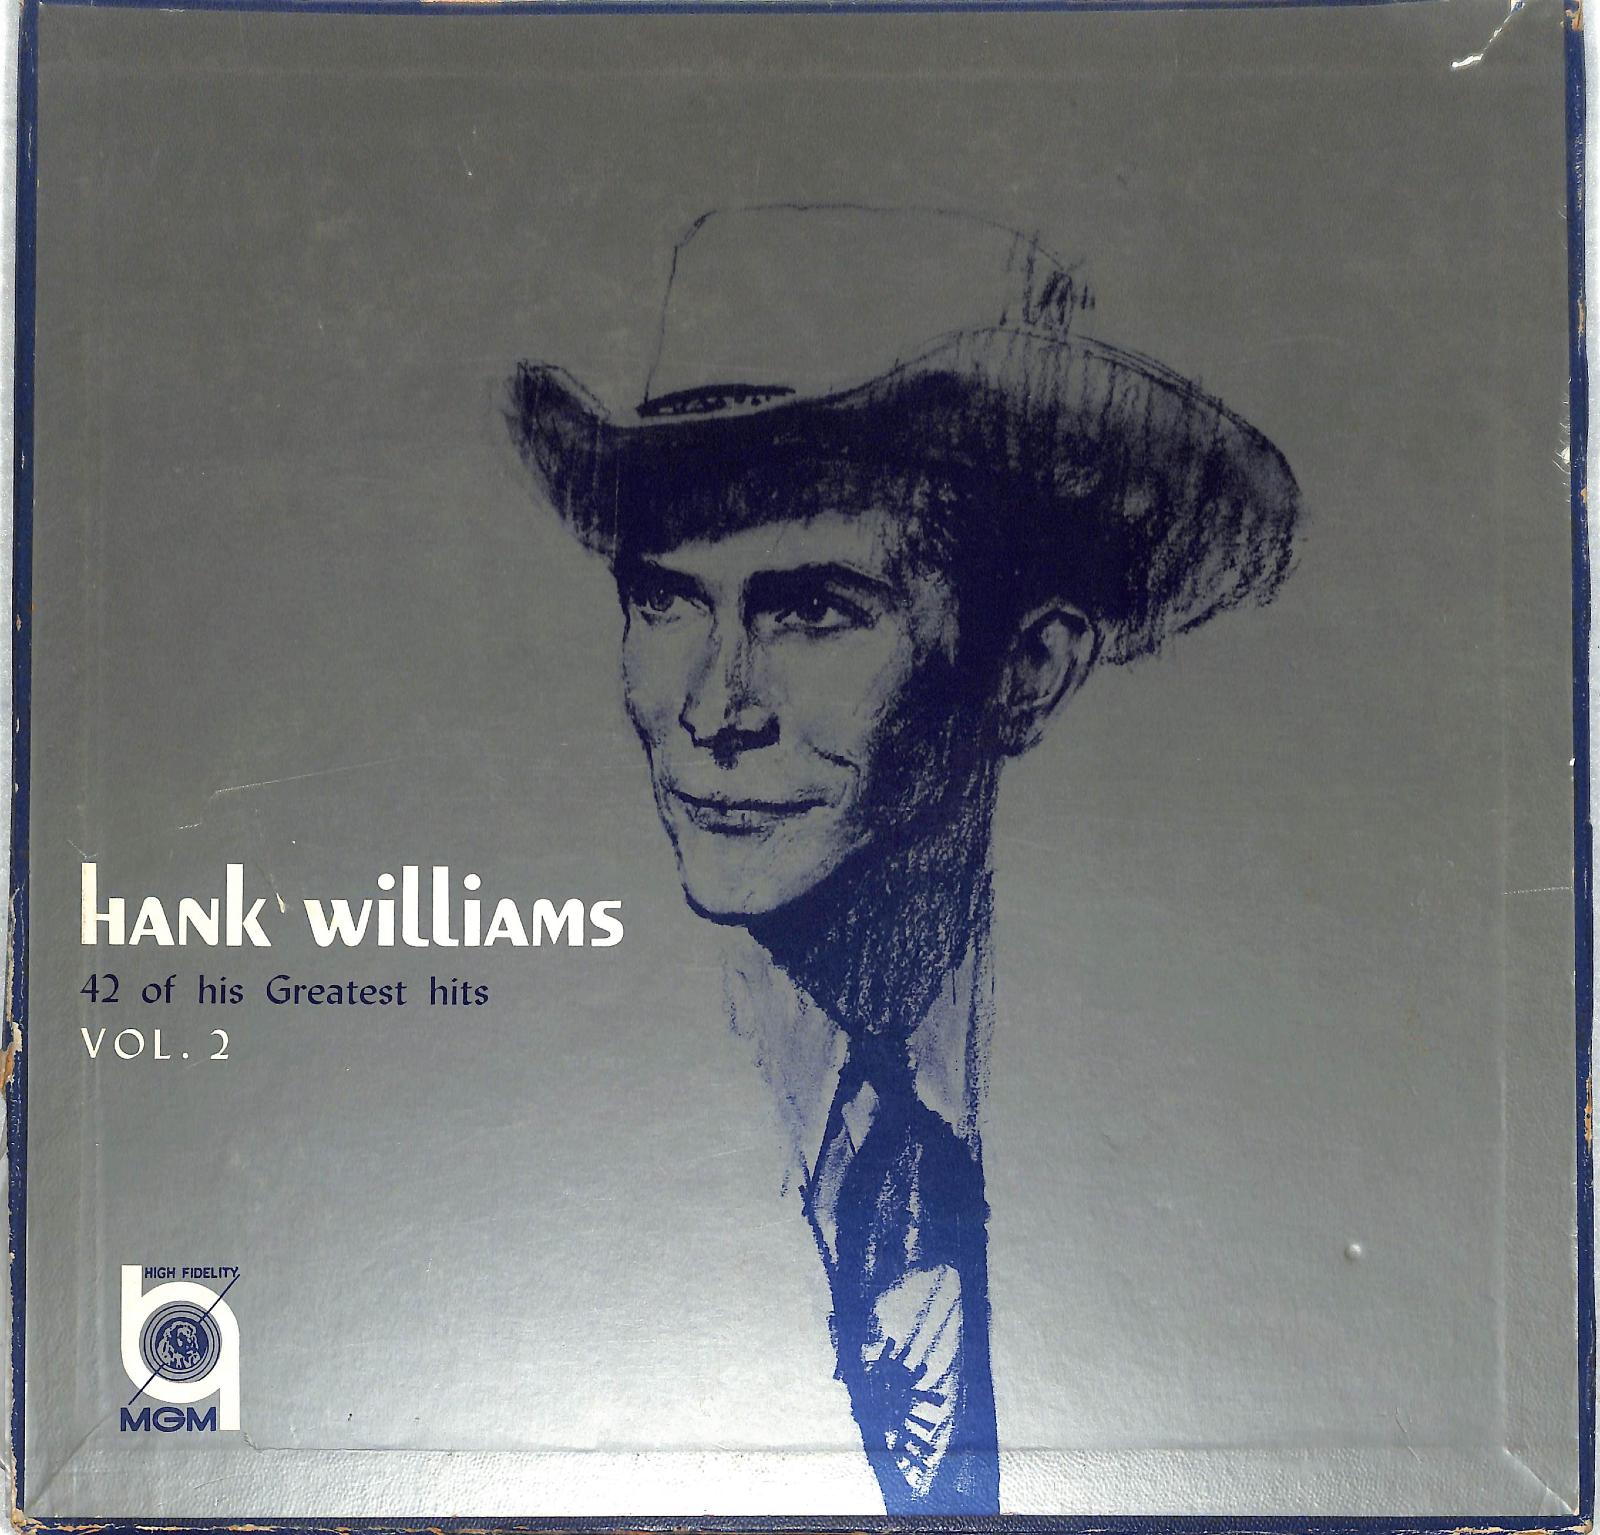 Hank Williams - 42 Of His Greatest Hits Vol. 2